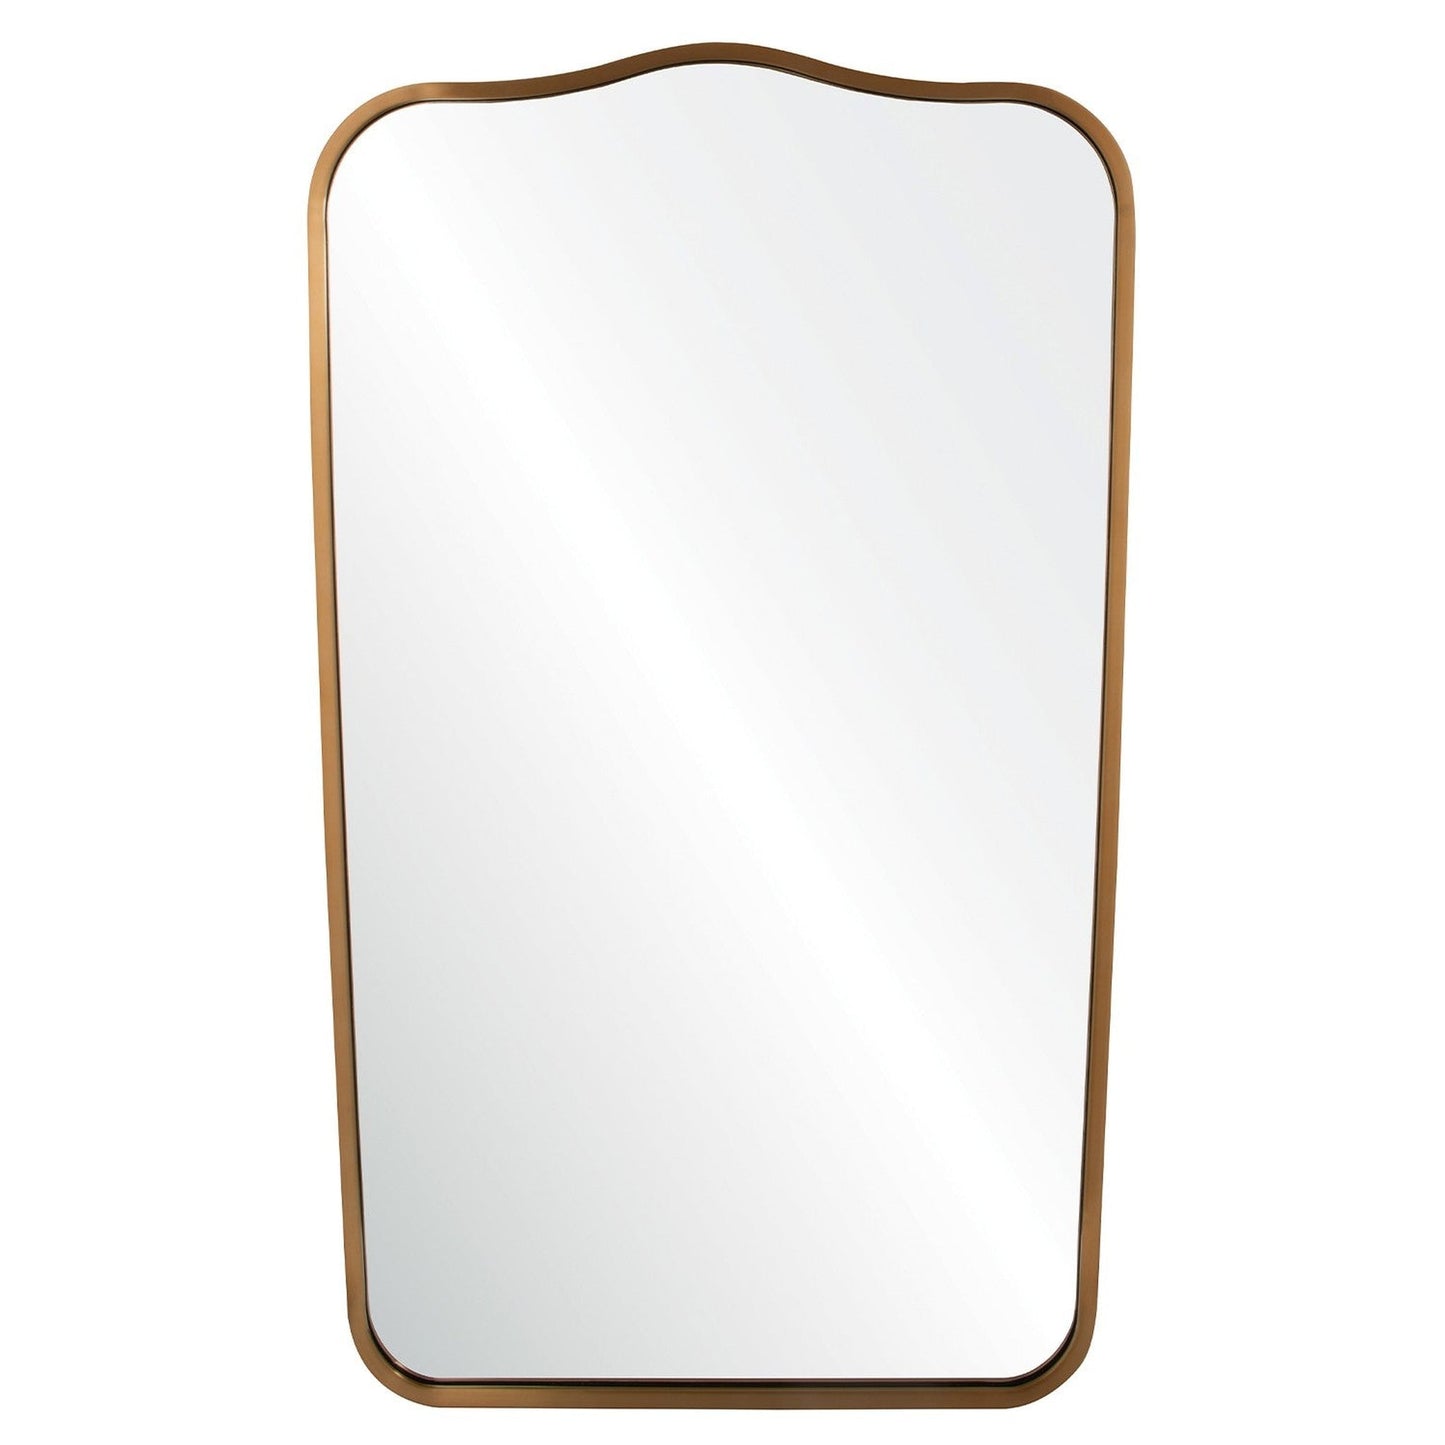 Mirror Home 26" x 42"Hand welded stainless steel bathroom mirror finished in antiqued light bronze.